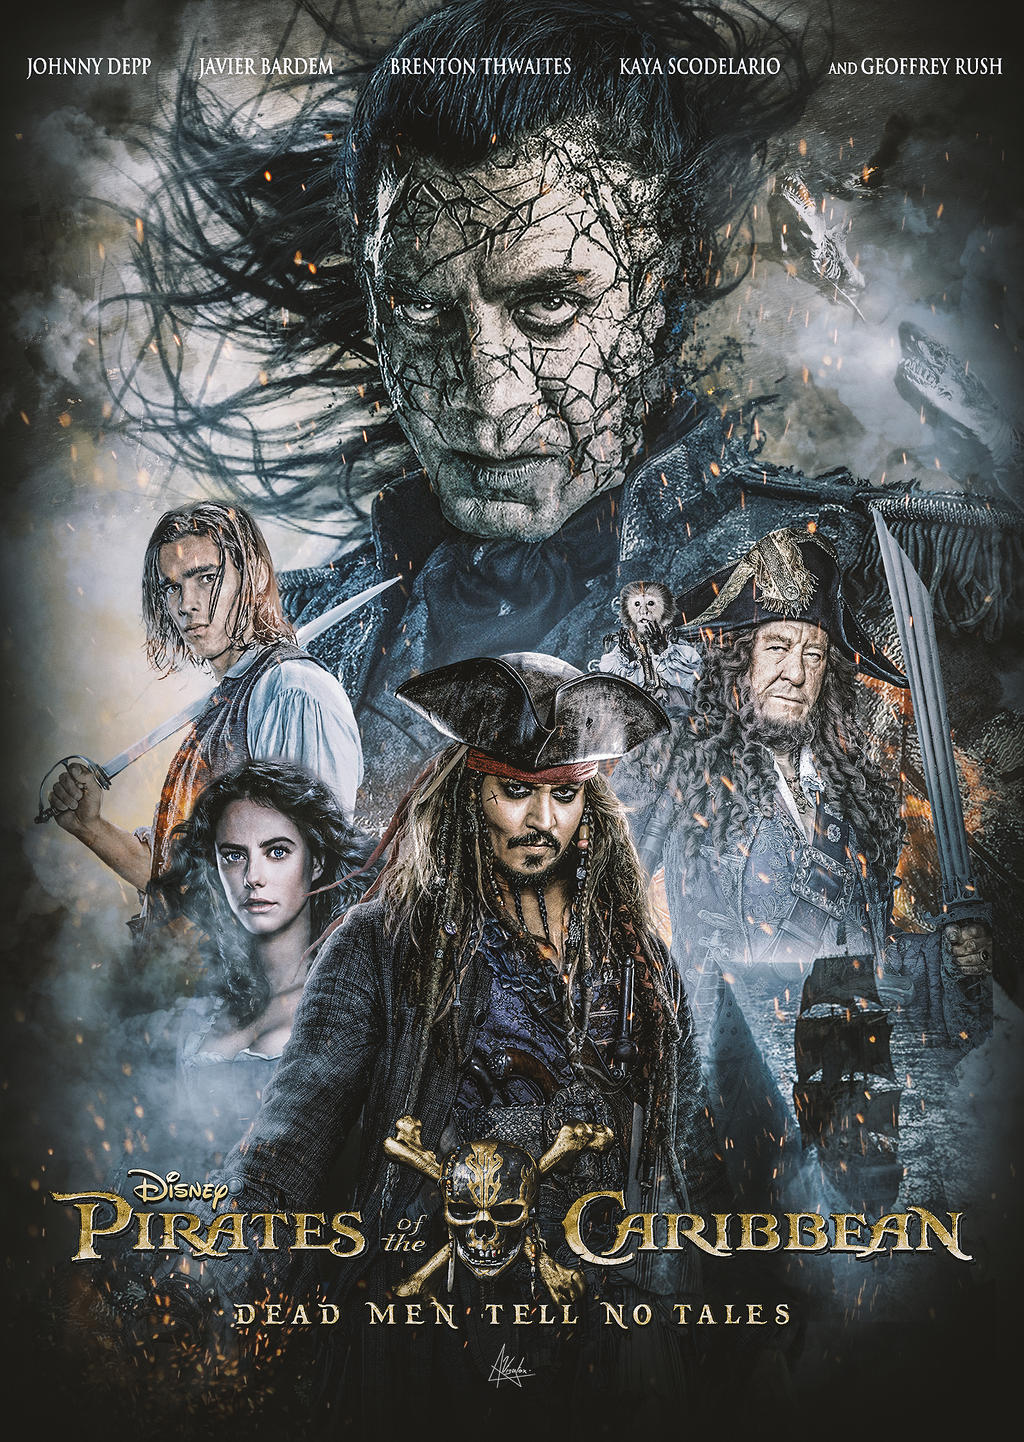 2017 Pirates Of The Caribbean: Dead Men Tell No Tales